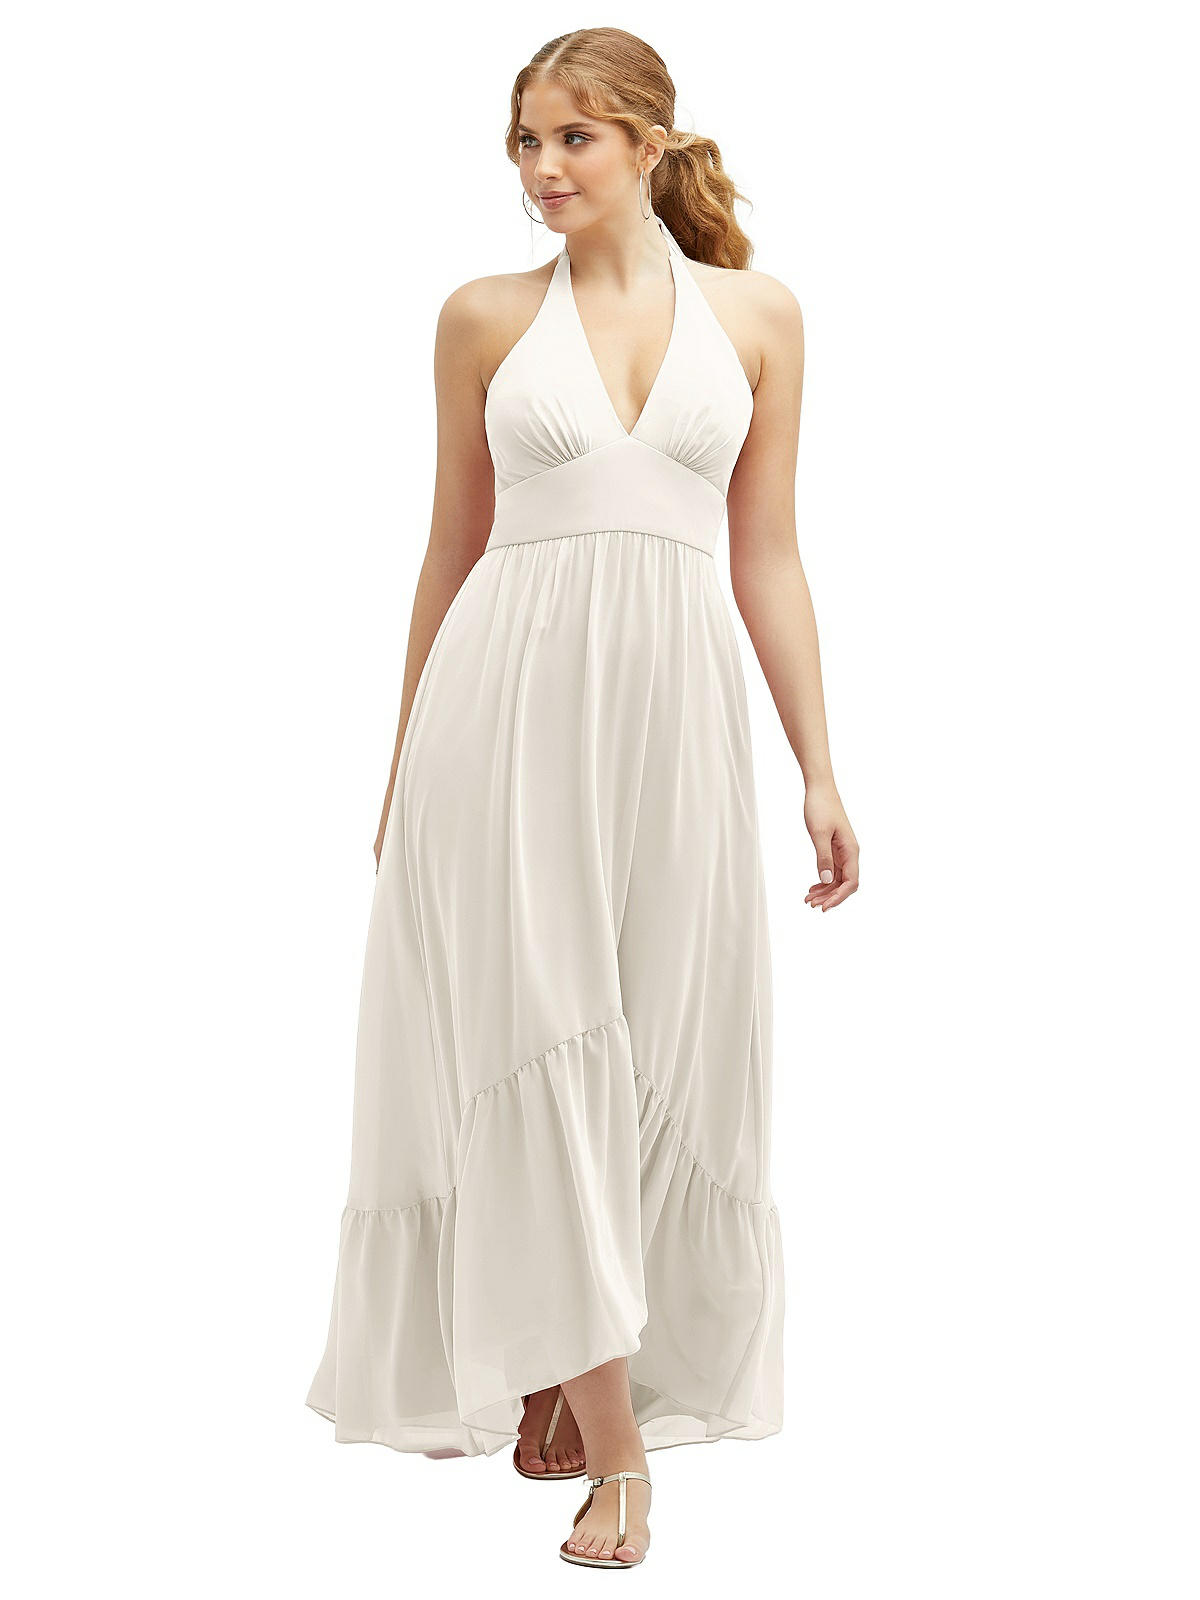 Buy Bridesmaids Dresses Online  After Six High-Low Bridesmaid Dress in Lux  Charmuese 3113